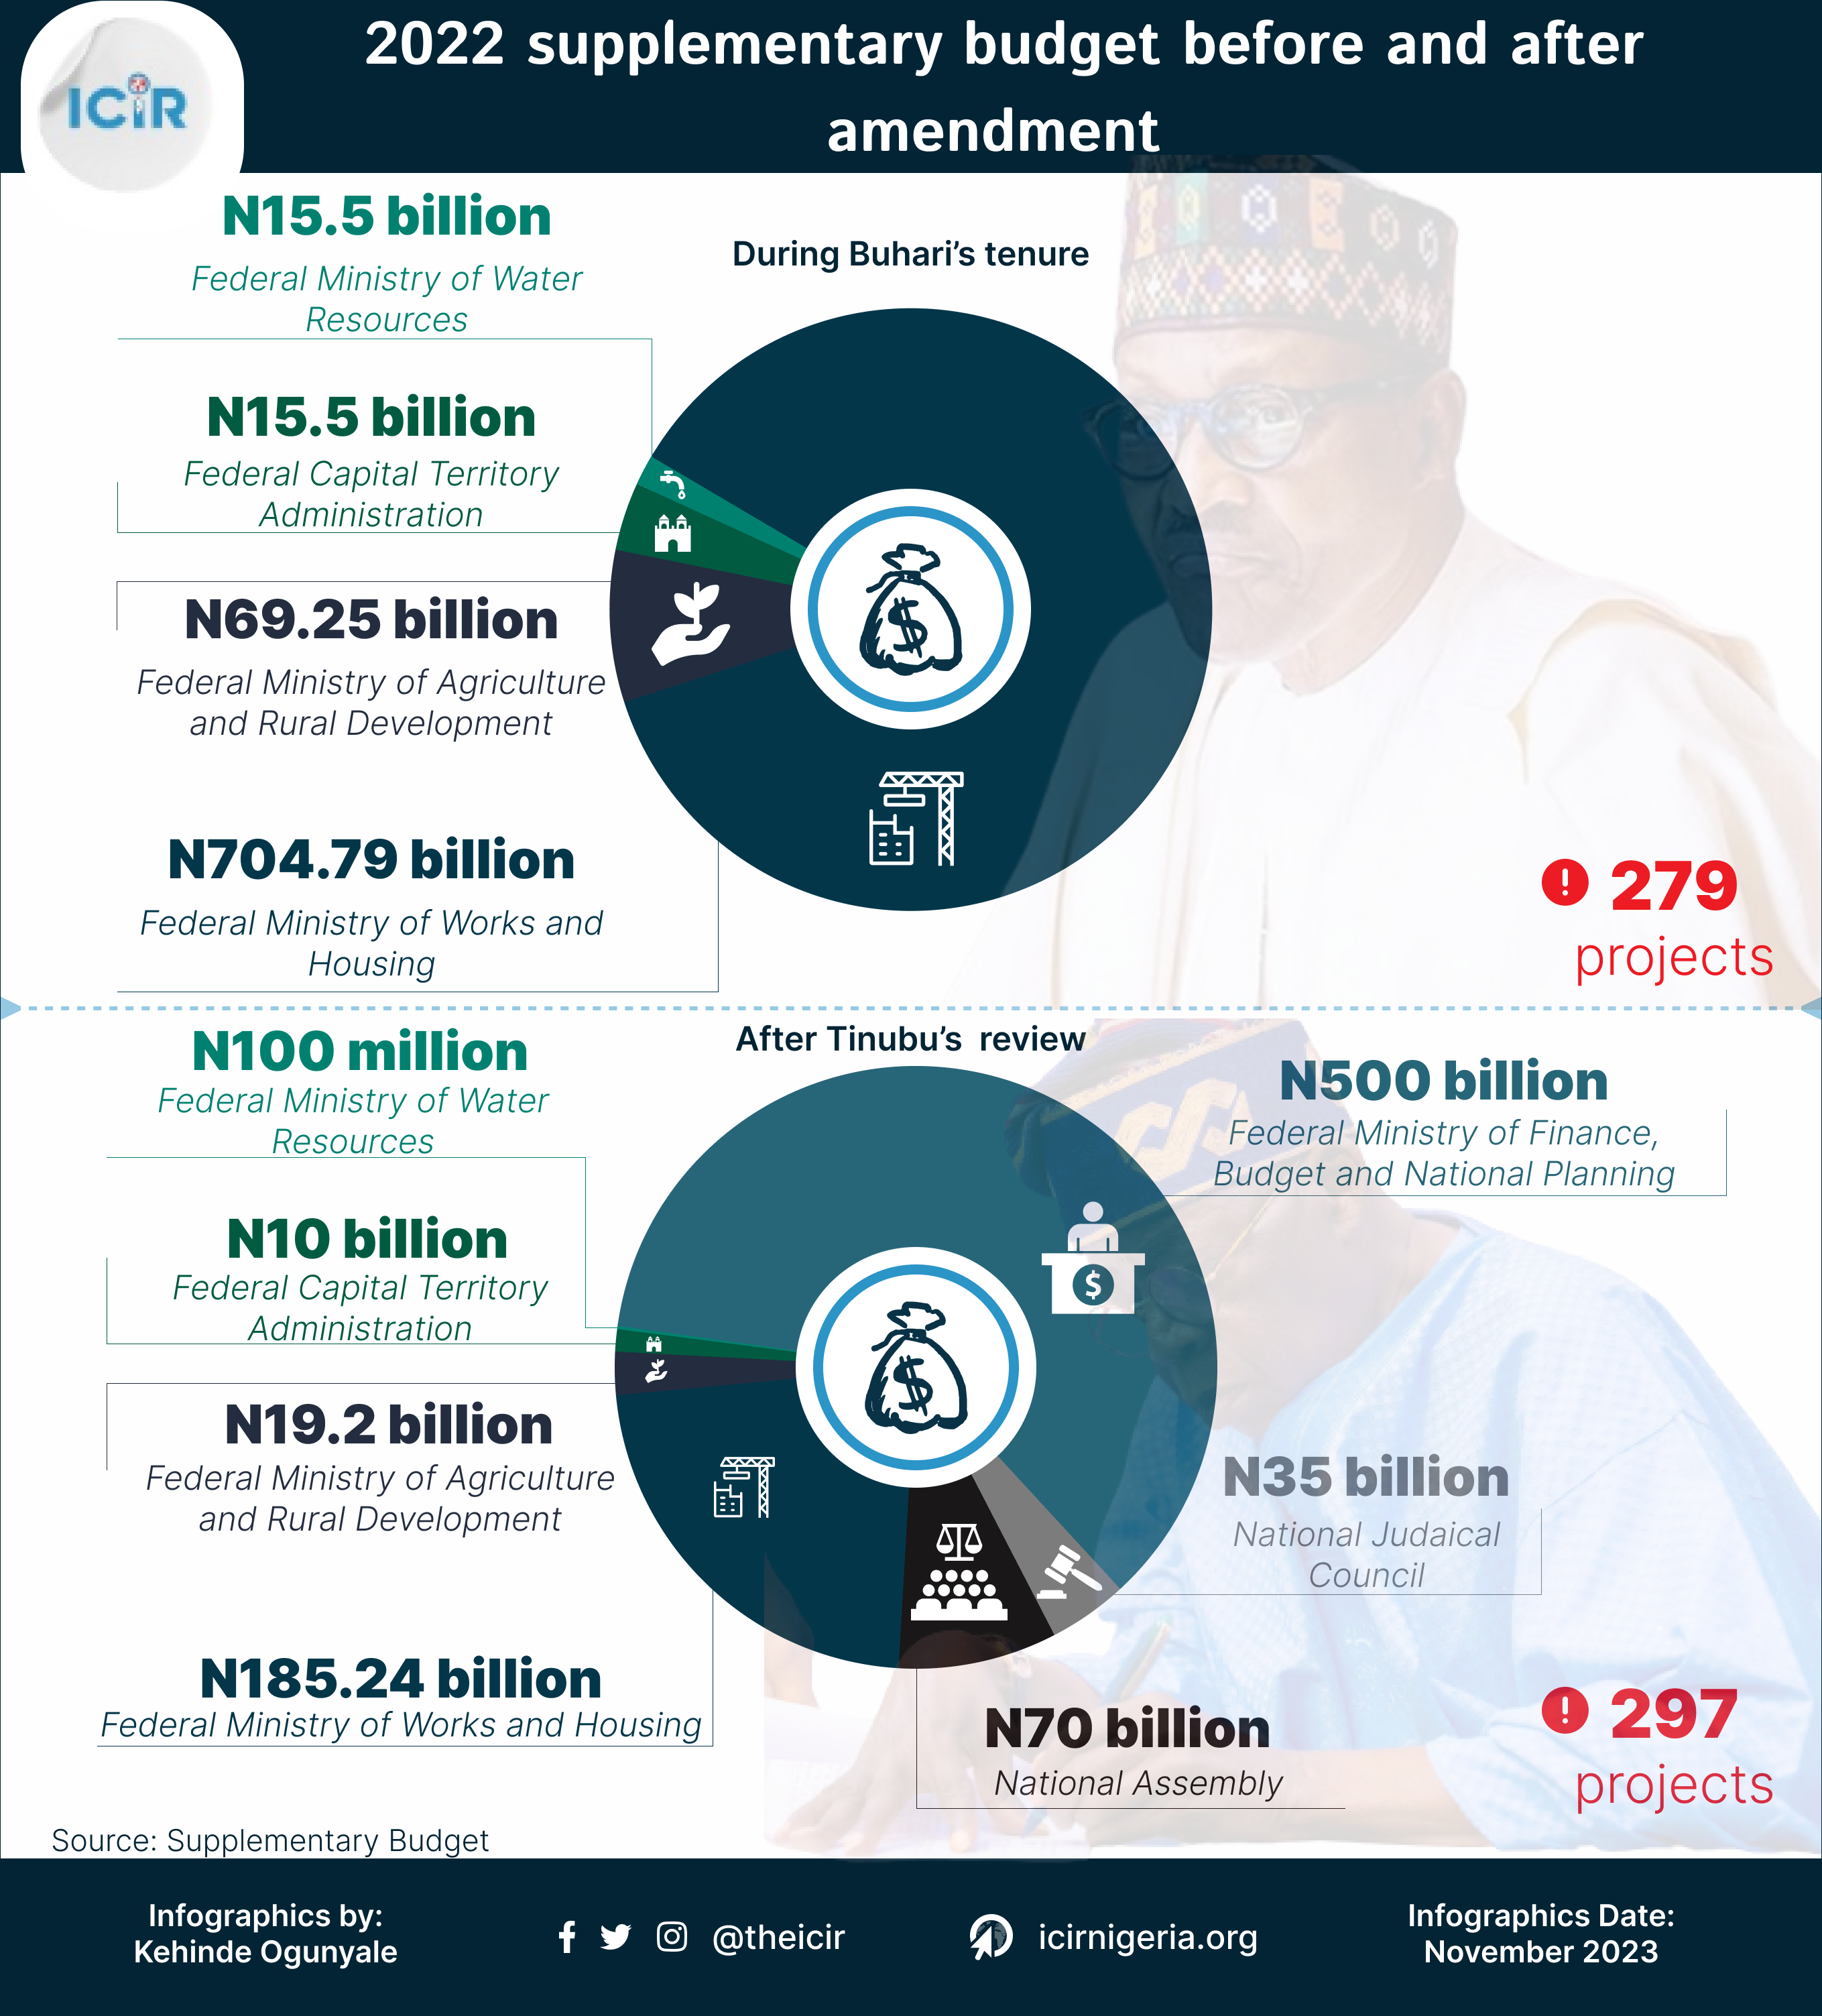 Infographic showing details of the 2022 supplementary budget, initially approved by the Buhari administration and subsequently reviewed by the Tinubu administration.